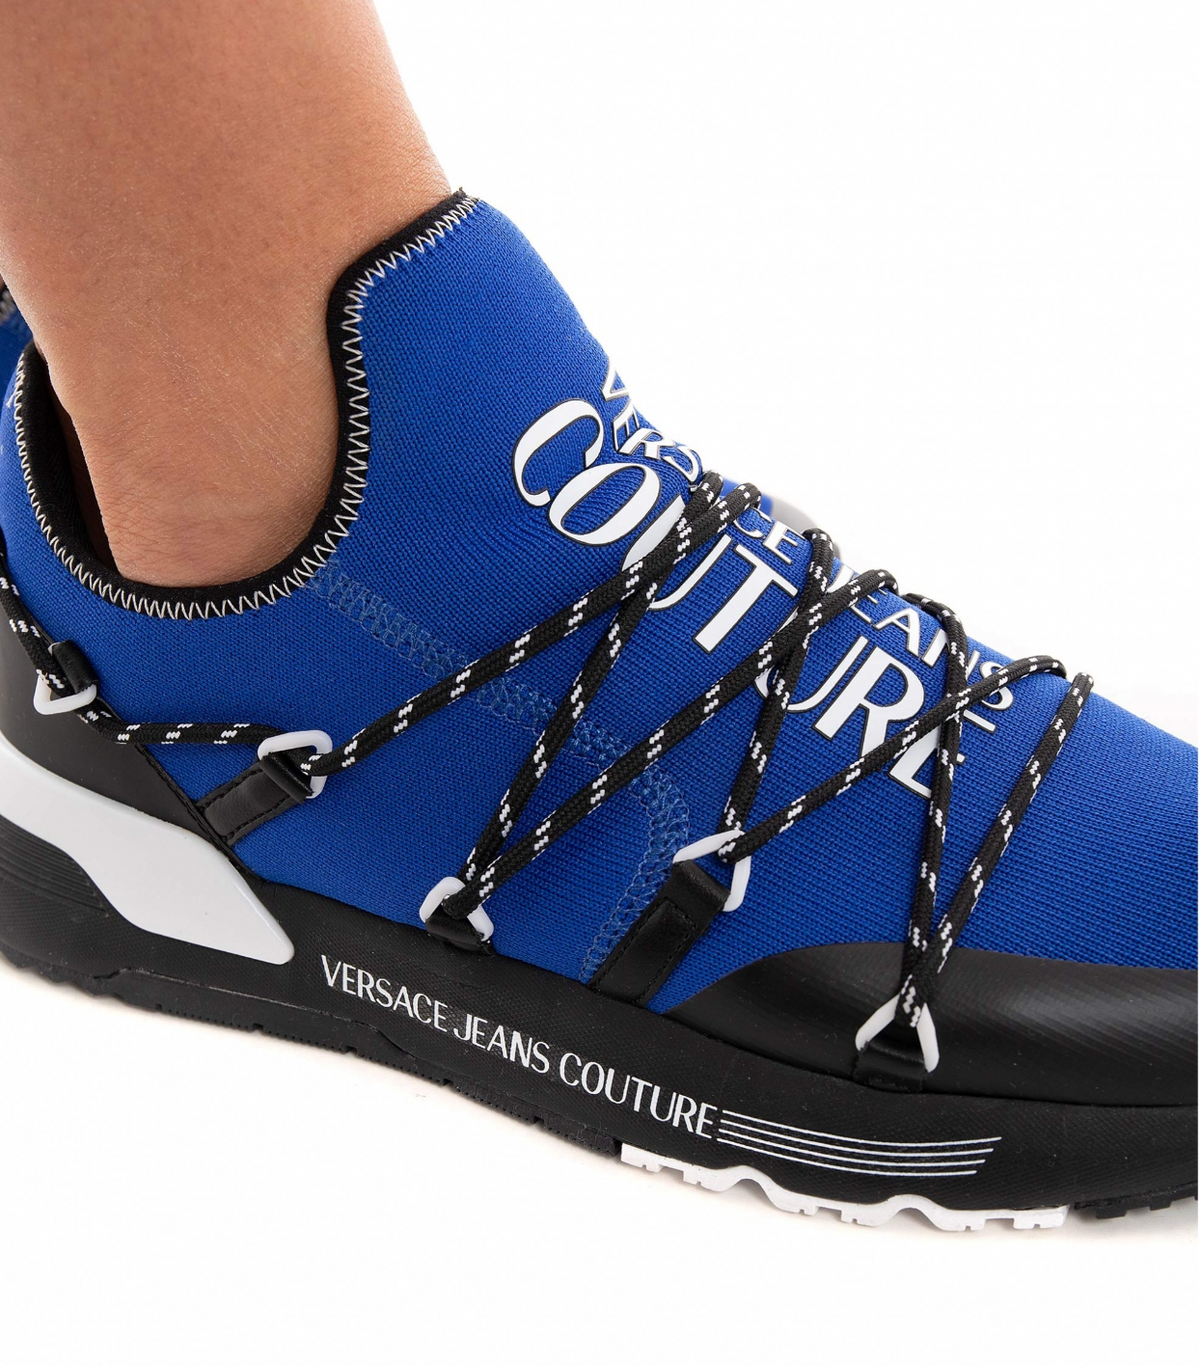 Versace Jeans Couture Blue Dynamic Sneakers